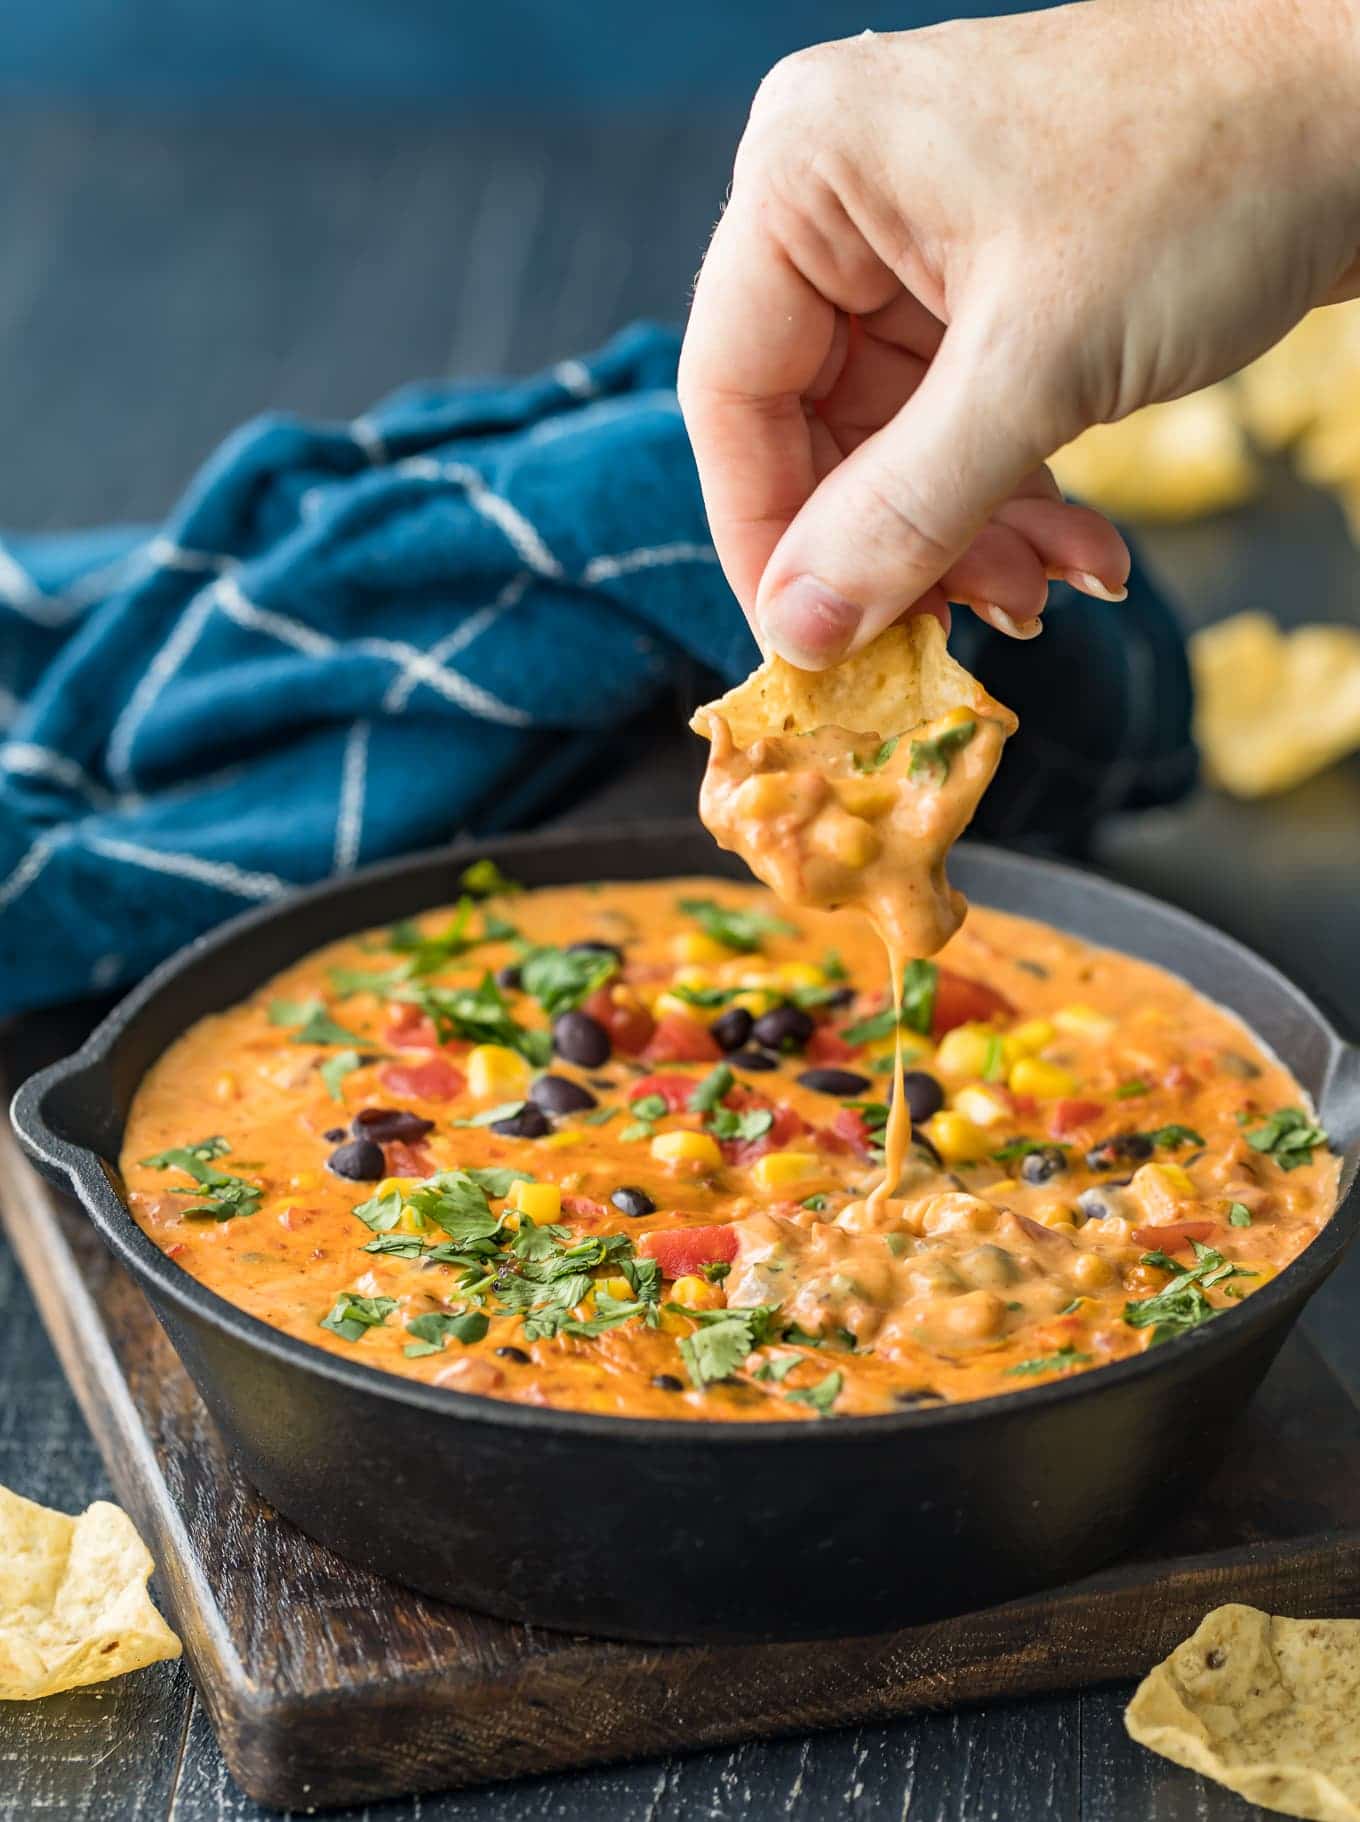 The cheese dip dripping from a tortilla chip